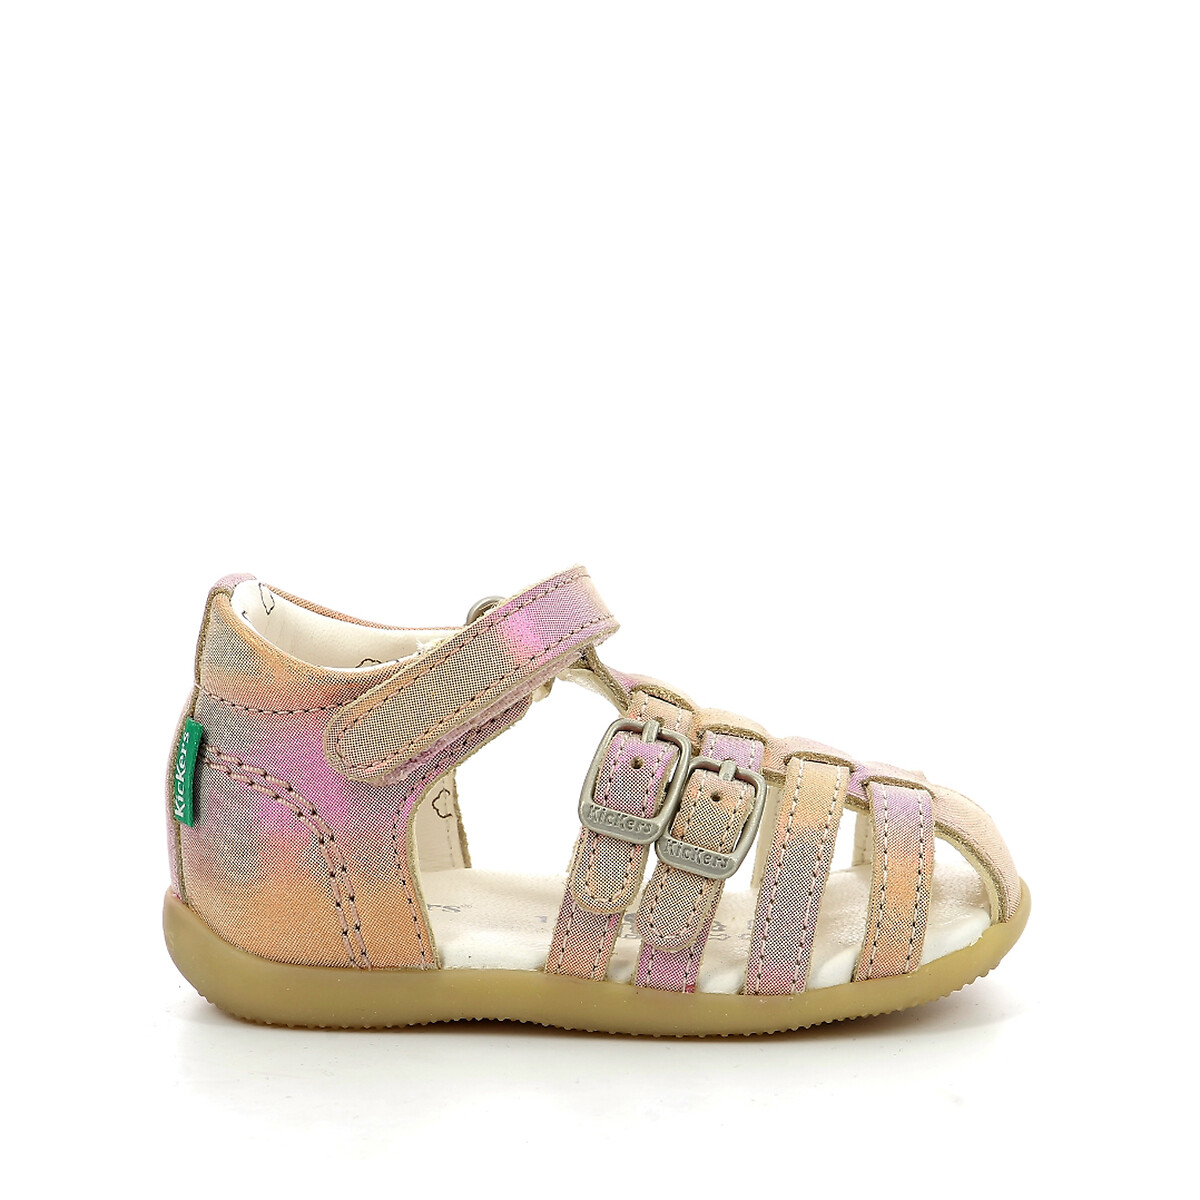 Image of Kids Bigkro Leather Sandals with Touch 'n' Close Fastening